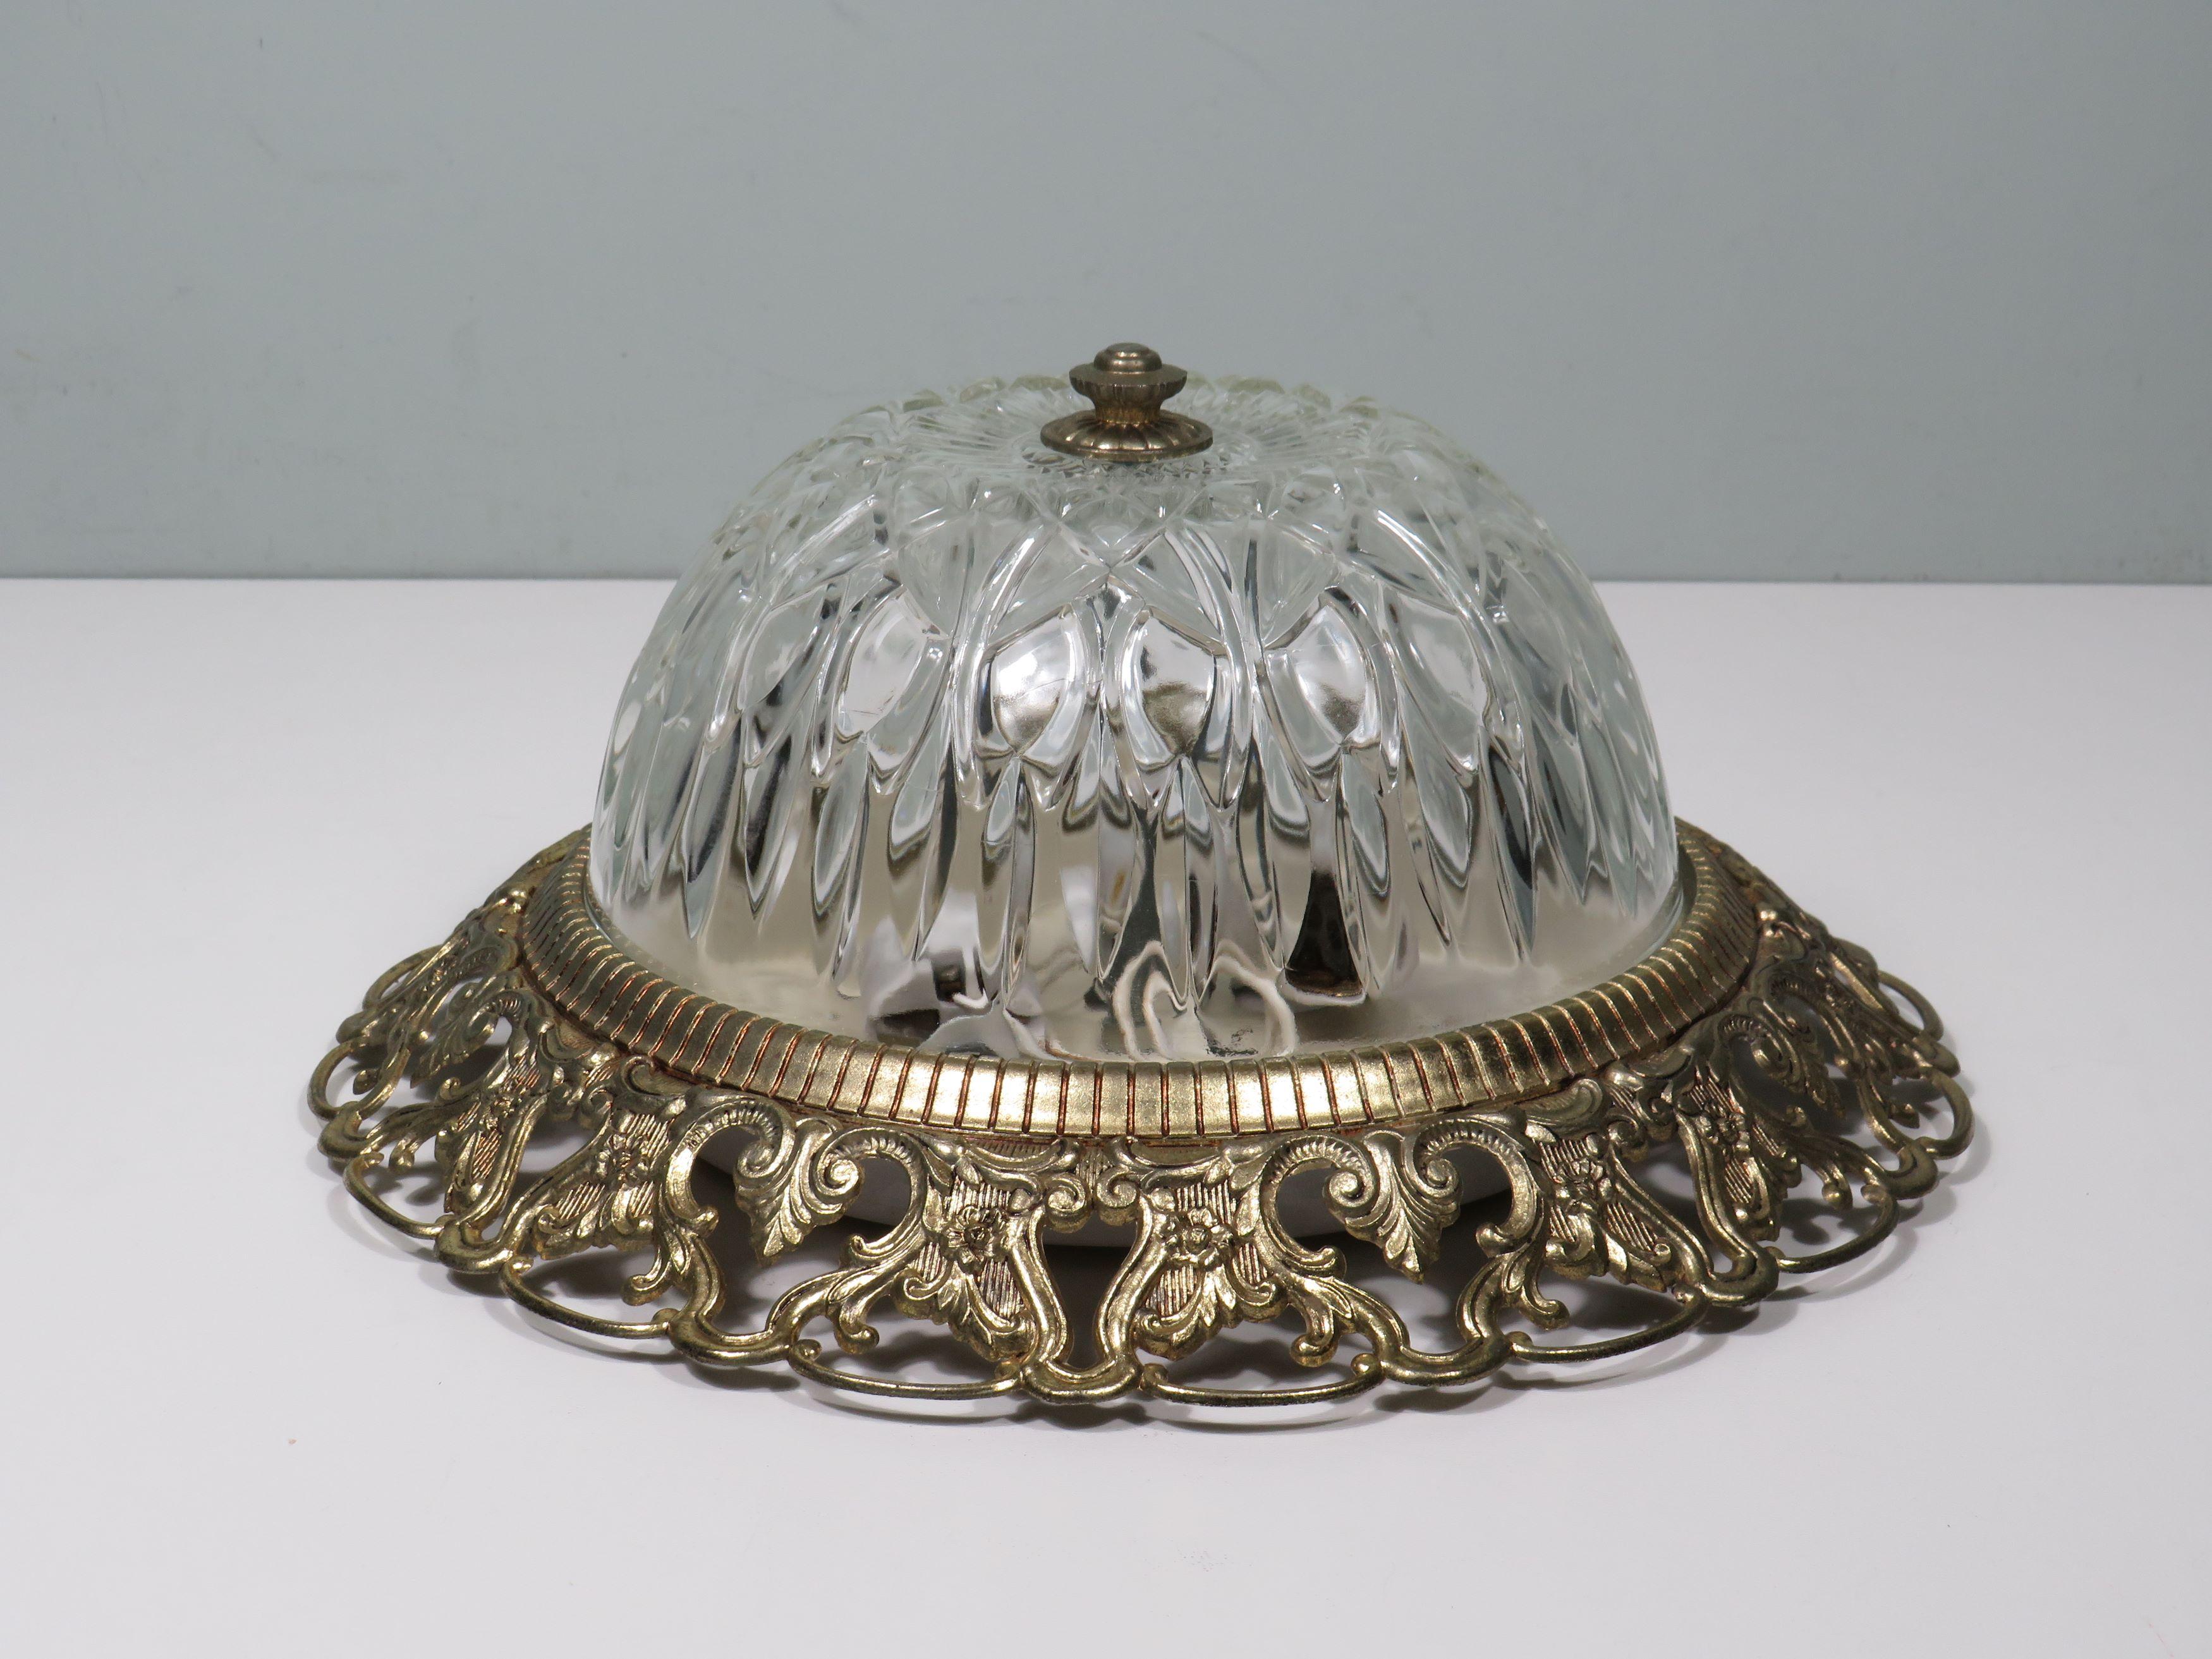 Gilt Hollywood Regency ceiling lamp, cut glass and openwork gilded edge. For Sale